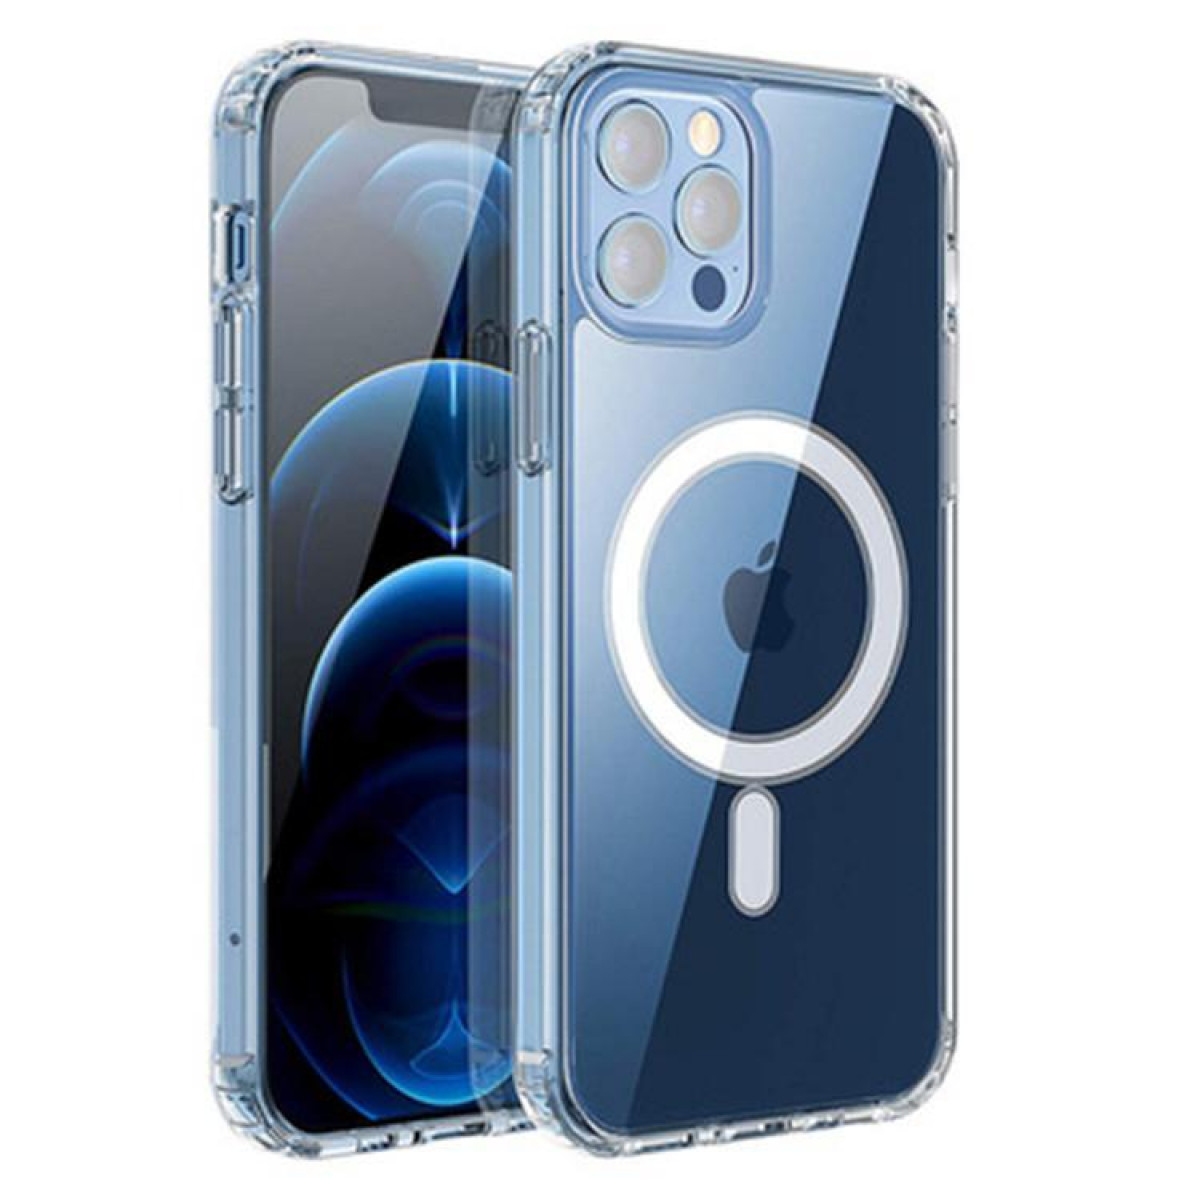 INF iPhone iPhone, 11 Backcover, Pro MagSafe-Ladegerät iPhone 11 Handyhülle für Transparent, Pro Max, Max Weiß